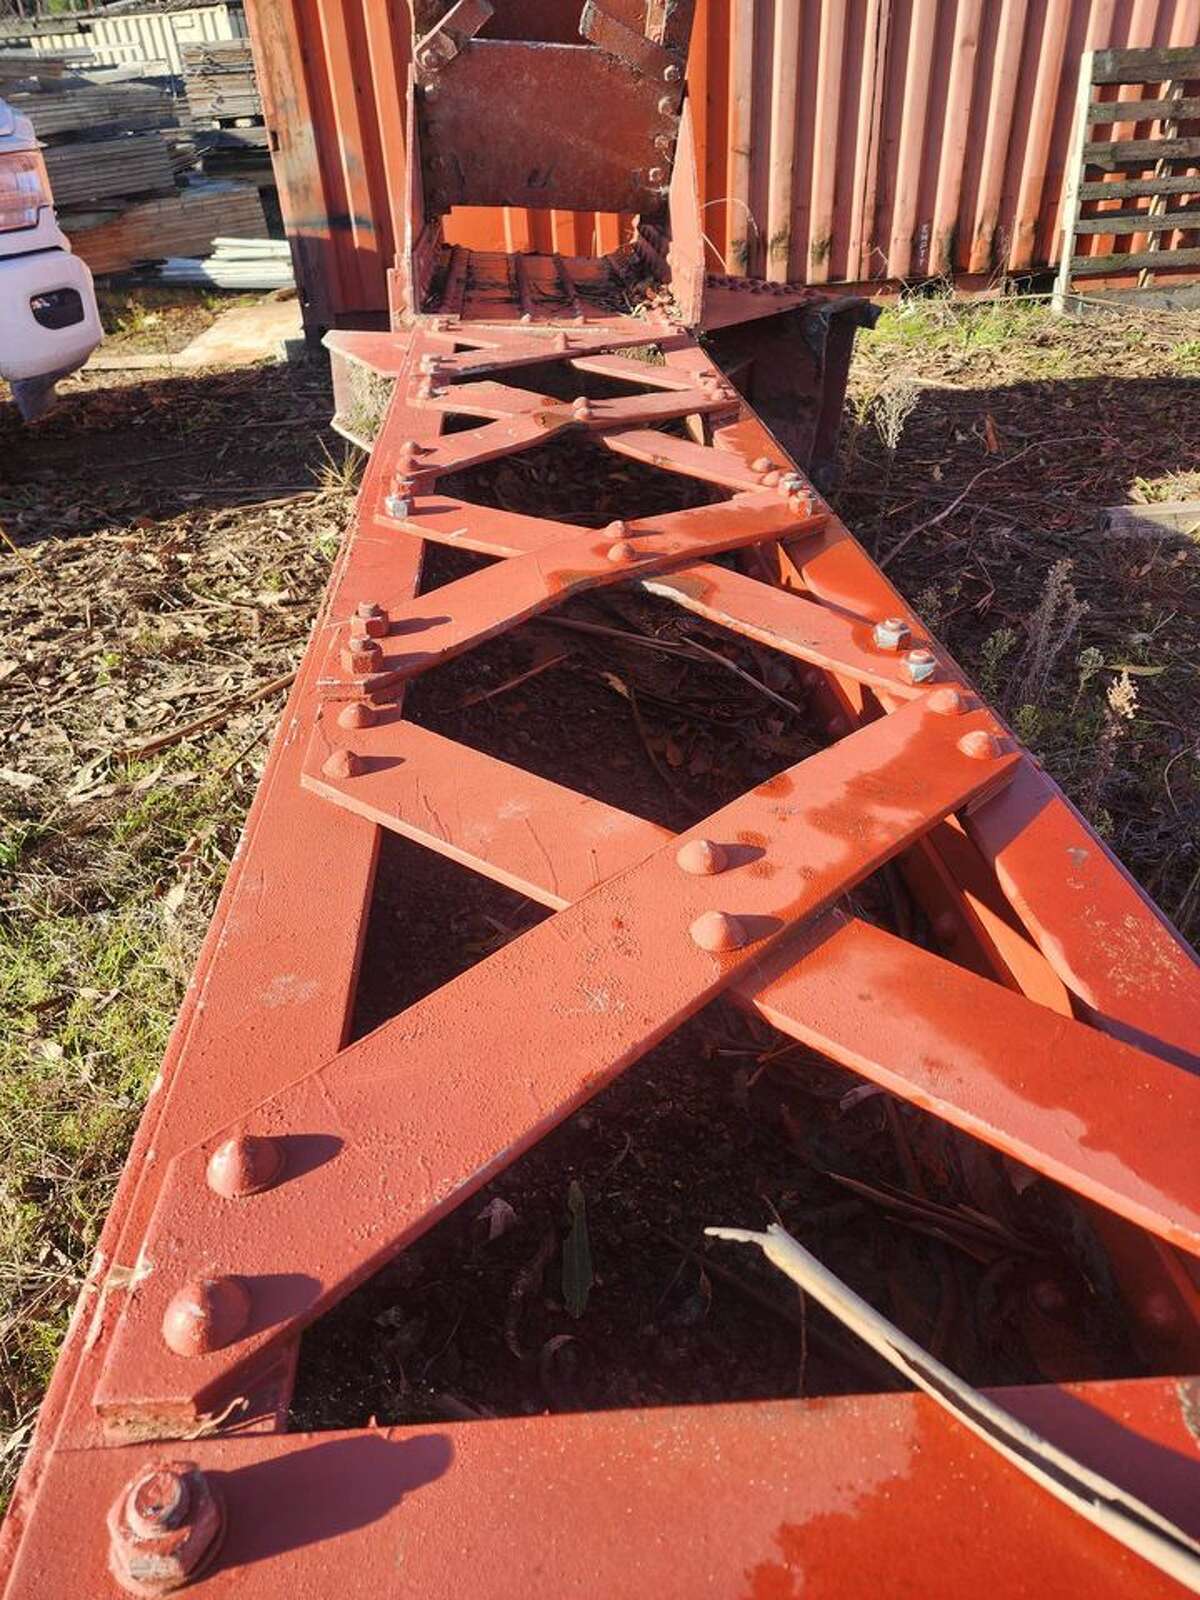 The buyer of two Golden Gate Bridge trusses had to find a new location for the large pieces.